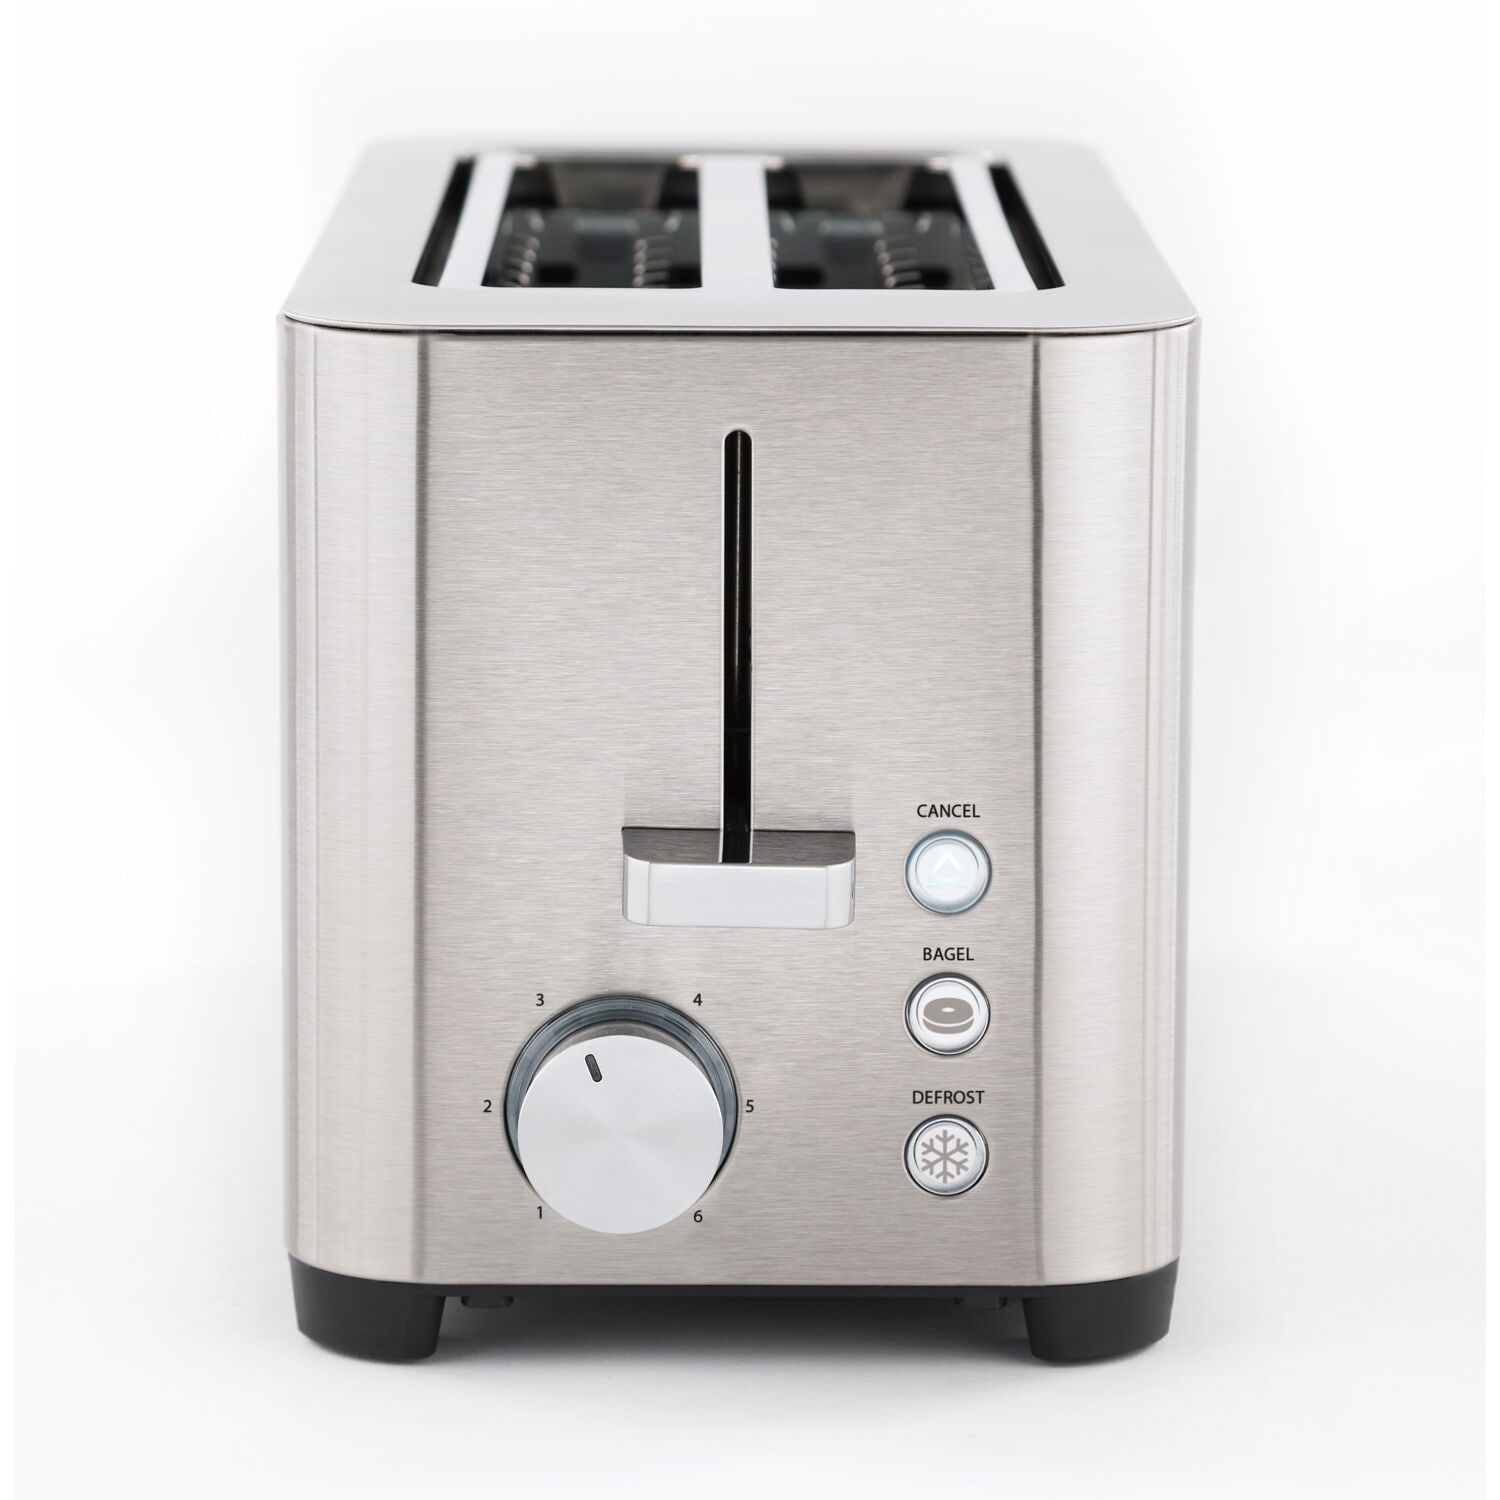 https://ak1.ostkcdn.com/images/products/is/images/direct/88061f00baf2bf0e6baa375fde1d342cac921a2f/Four-Slice-Wide-Slot-Toaster%2C-Stainless-Steel.jpg